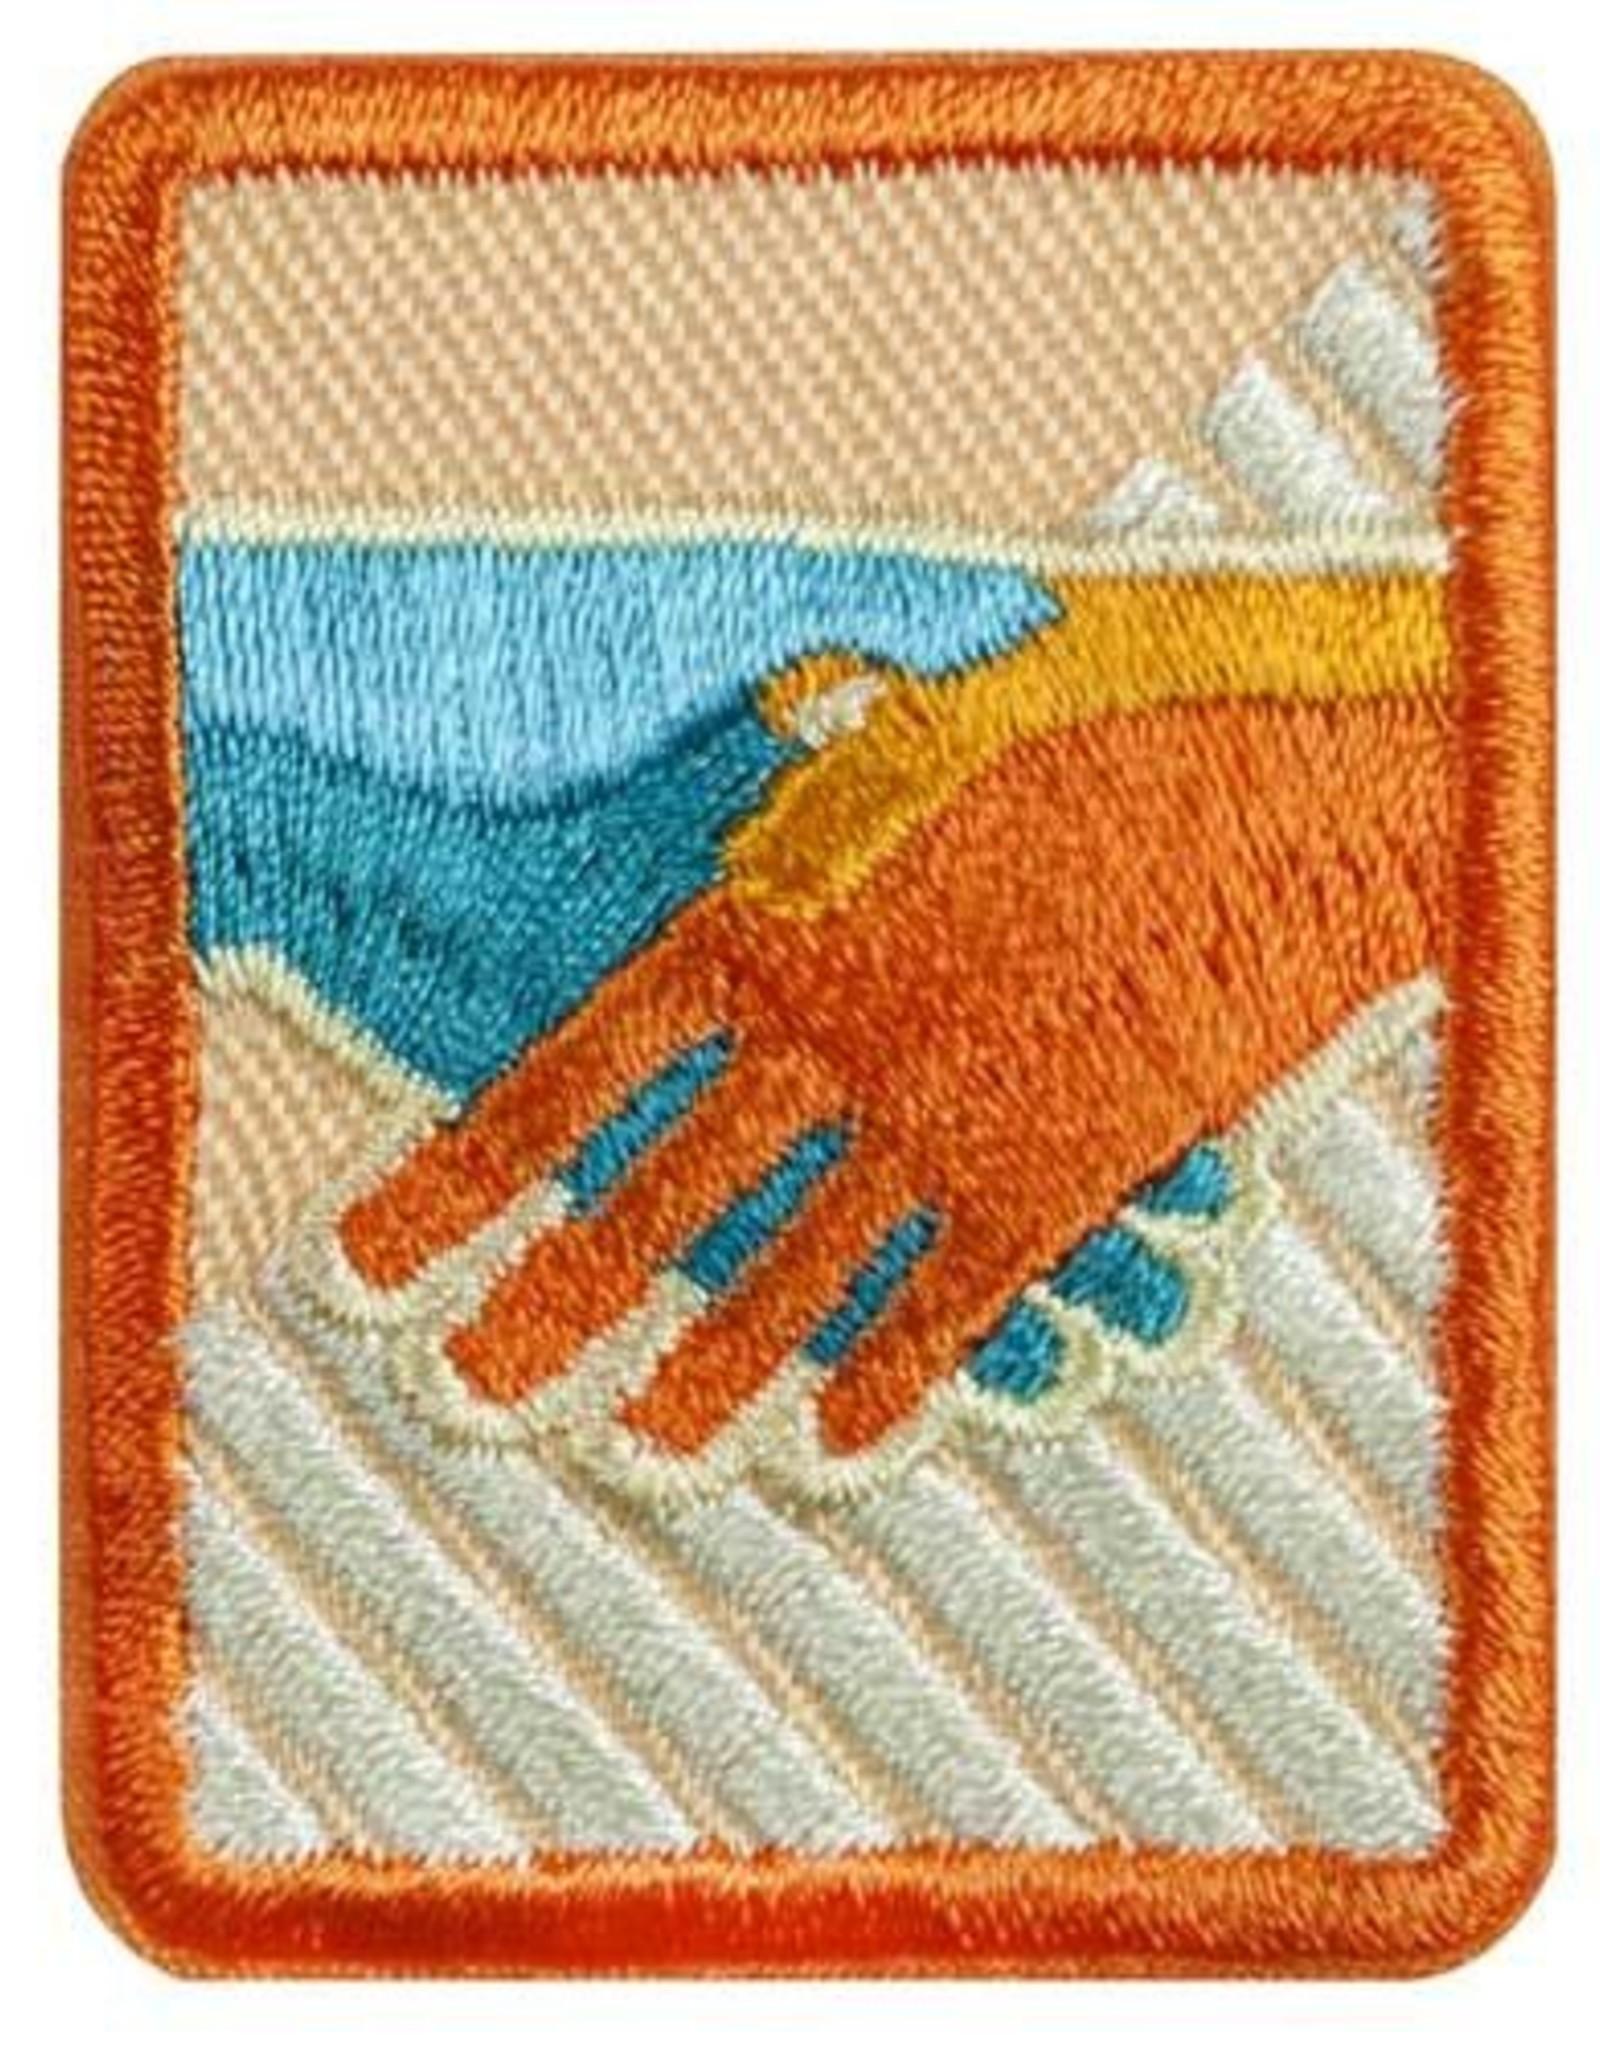 GIRL SCOUTS OF THE USA Senior Business Etiquette Badge